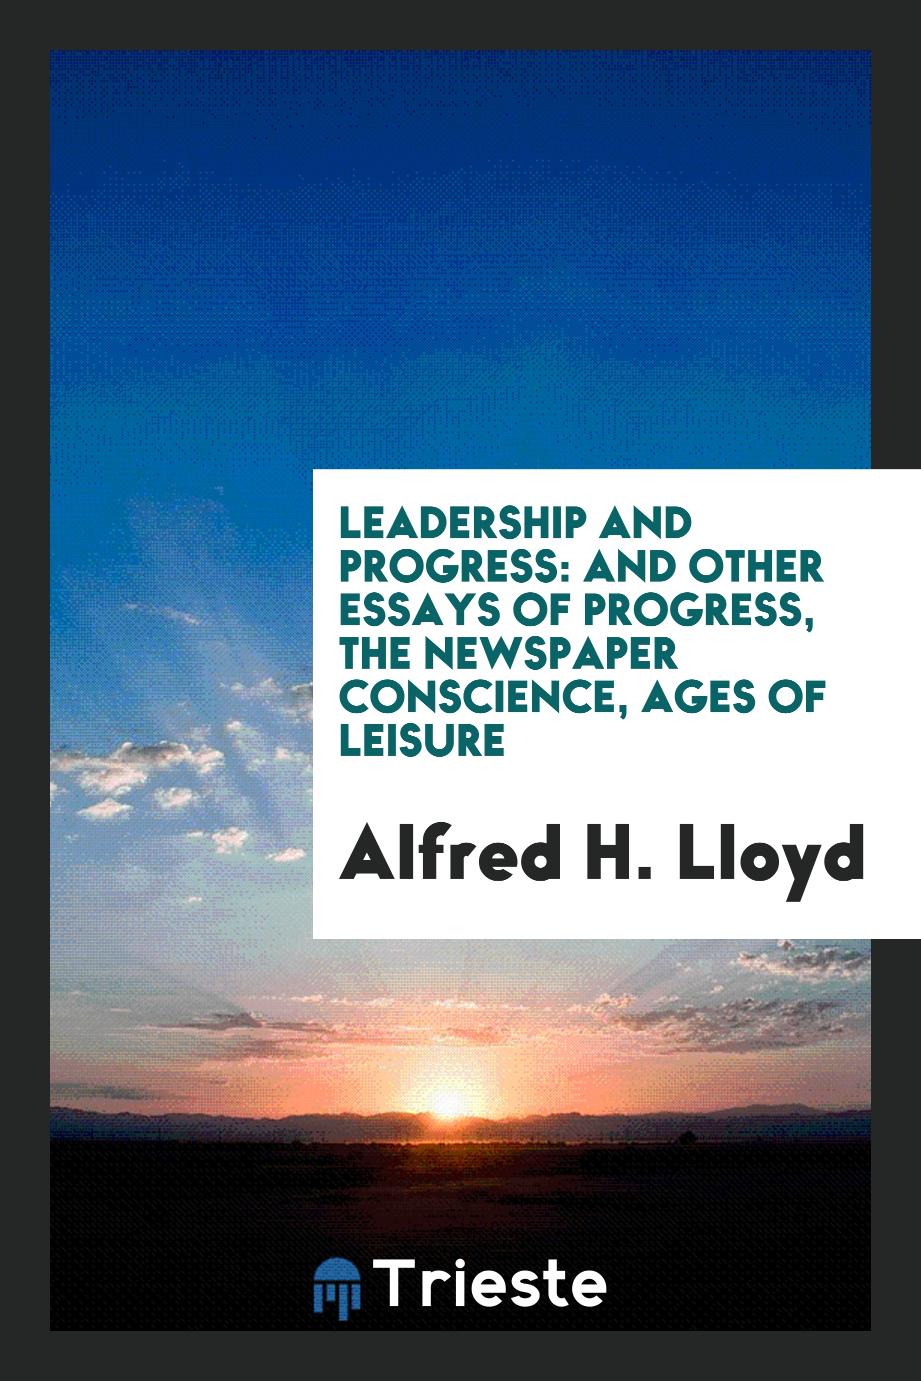 Leadership and Progress: And Other Essays of Progress, the Newspaper Conscience, Ages of Leisure